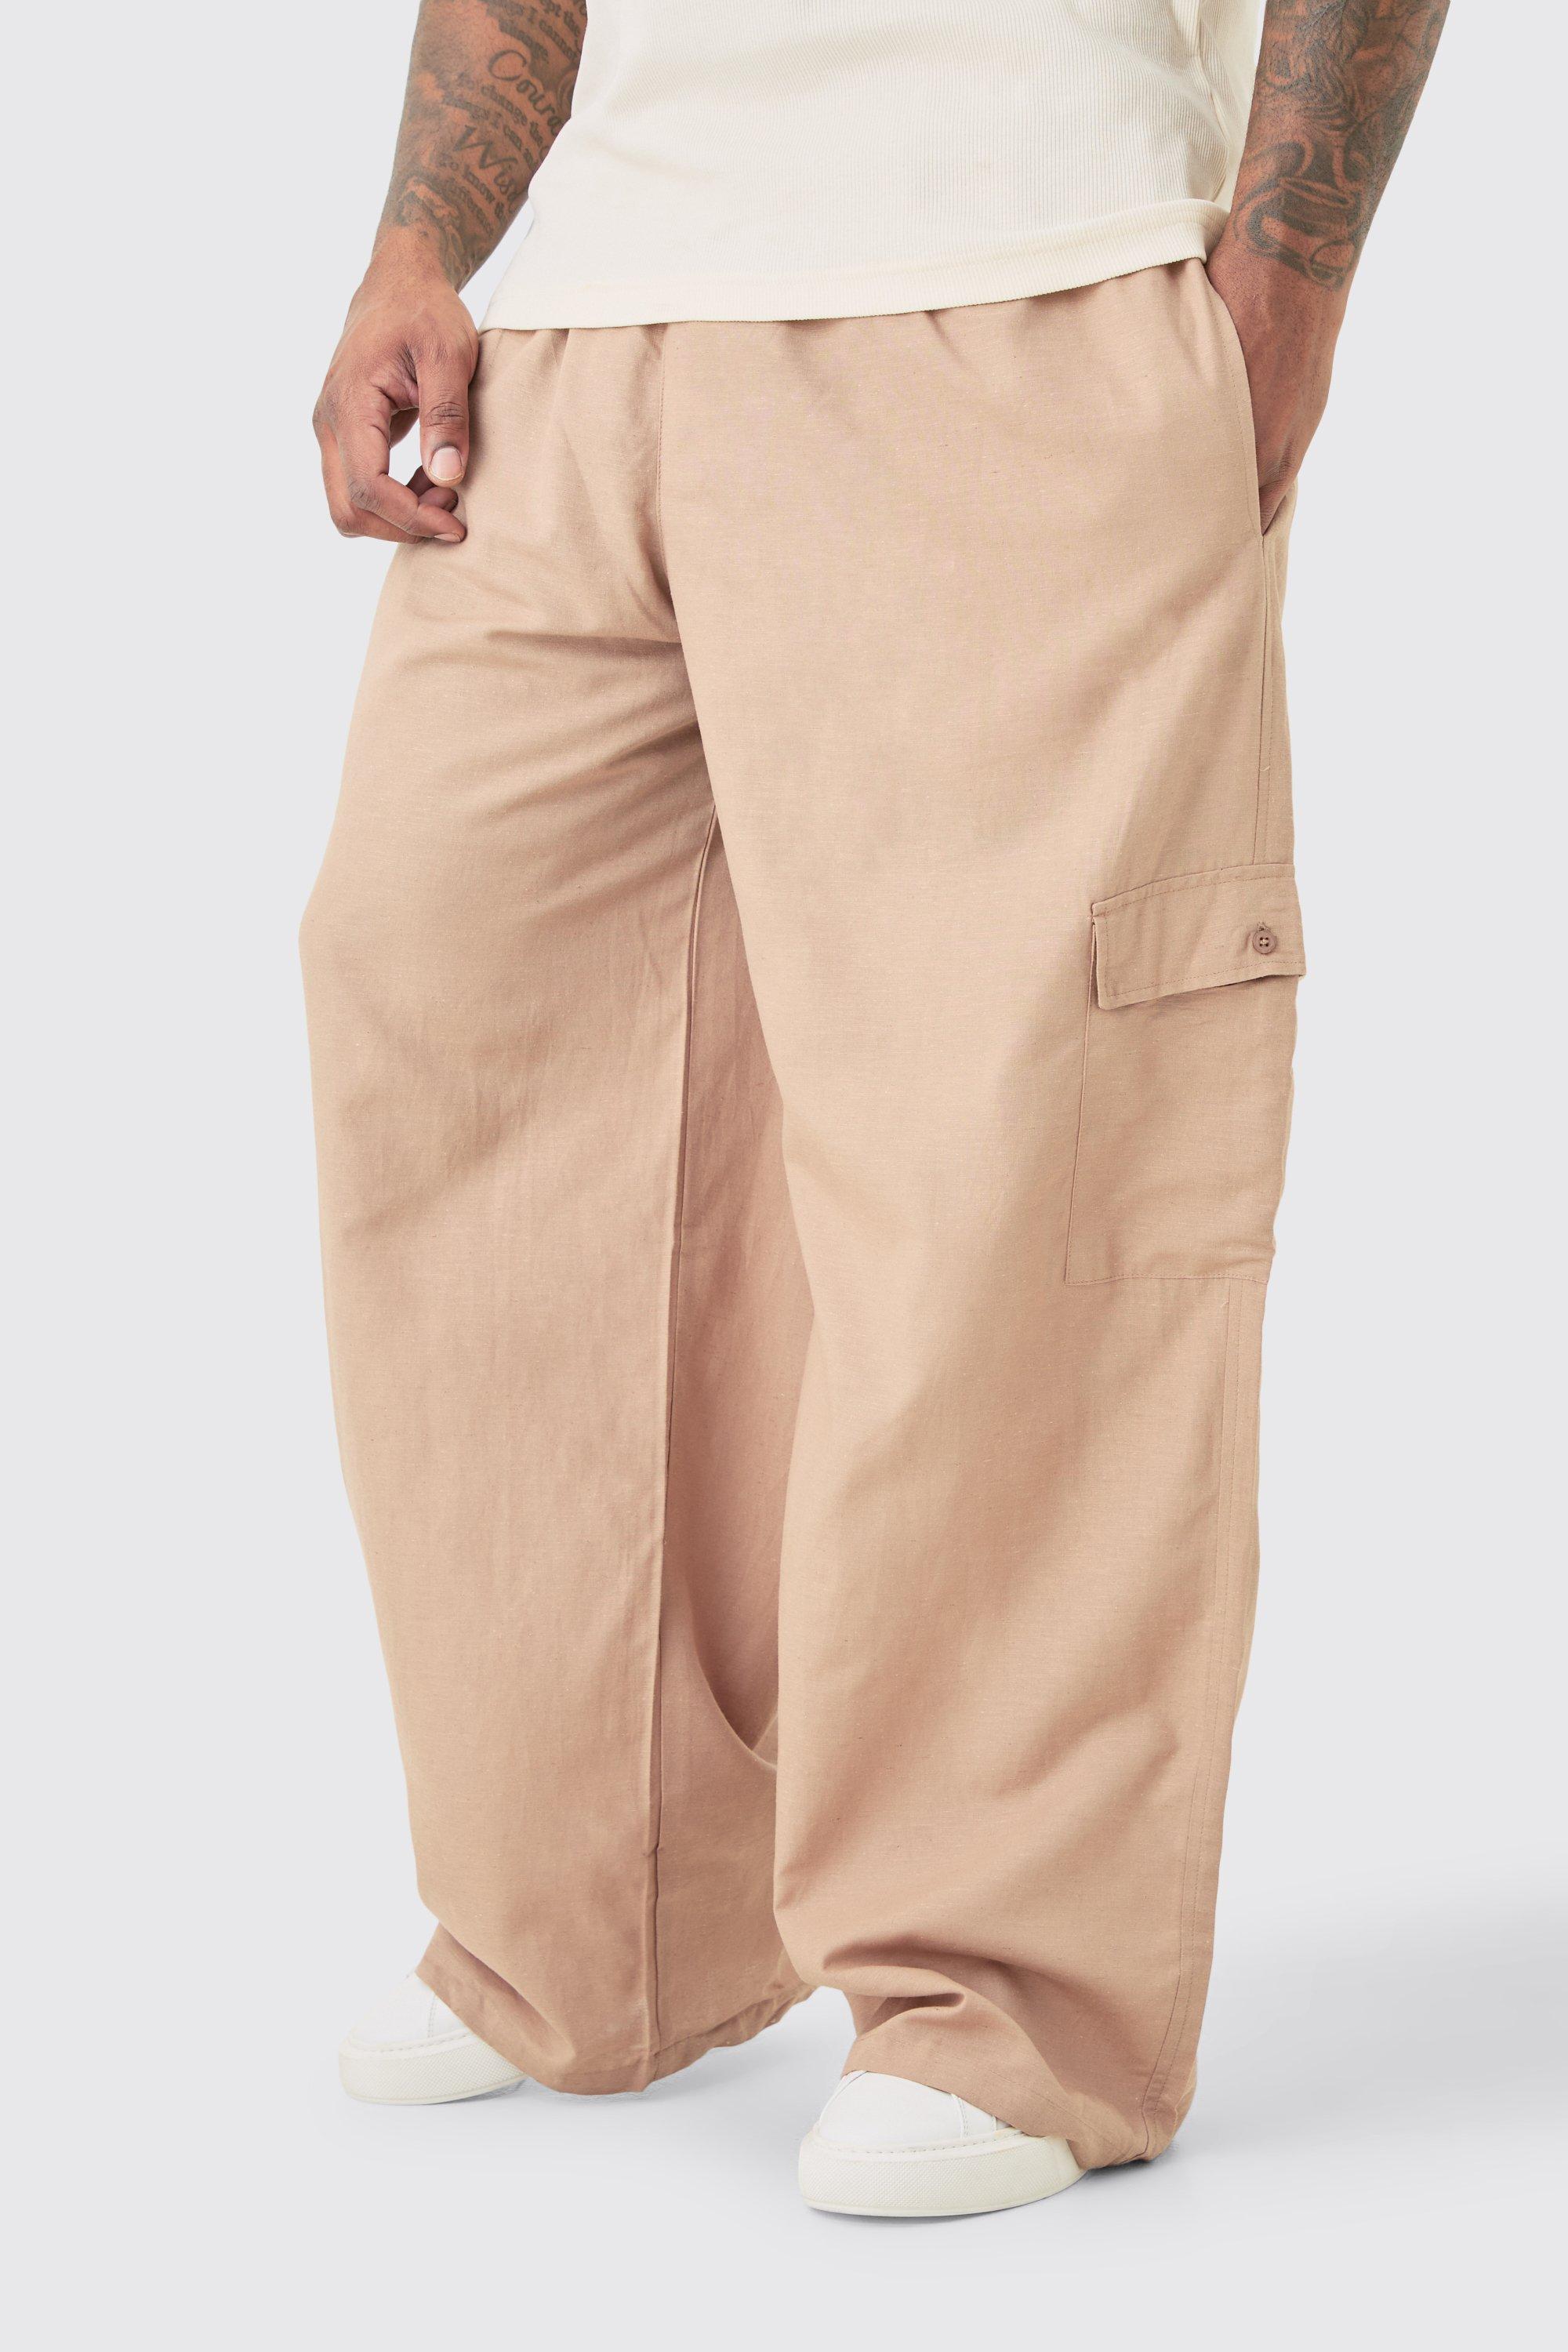 Boohoo Plus Elasticated Waist Oversized Linen Cargo Trouser In Taupe, Taupe